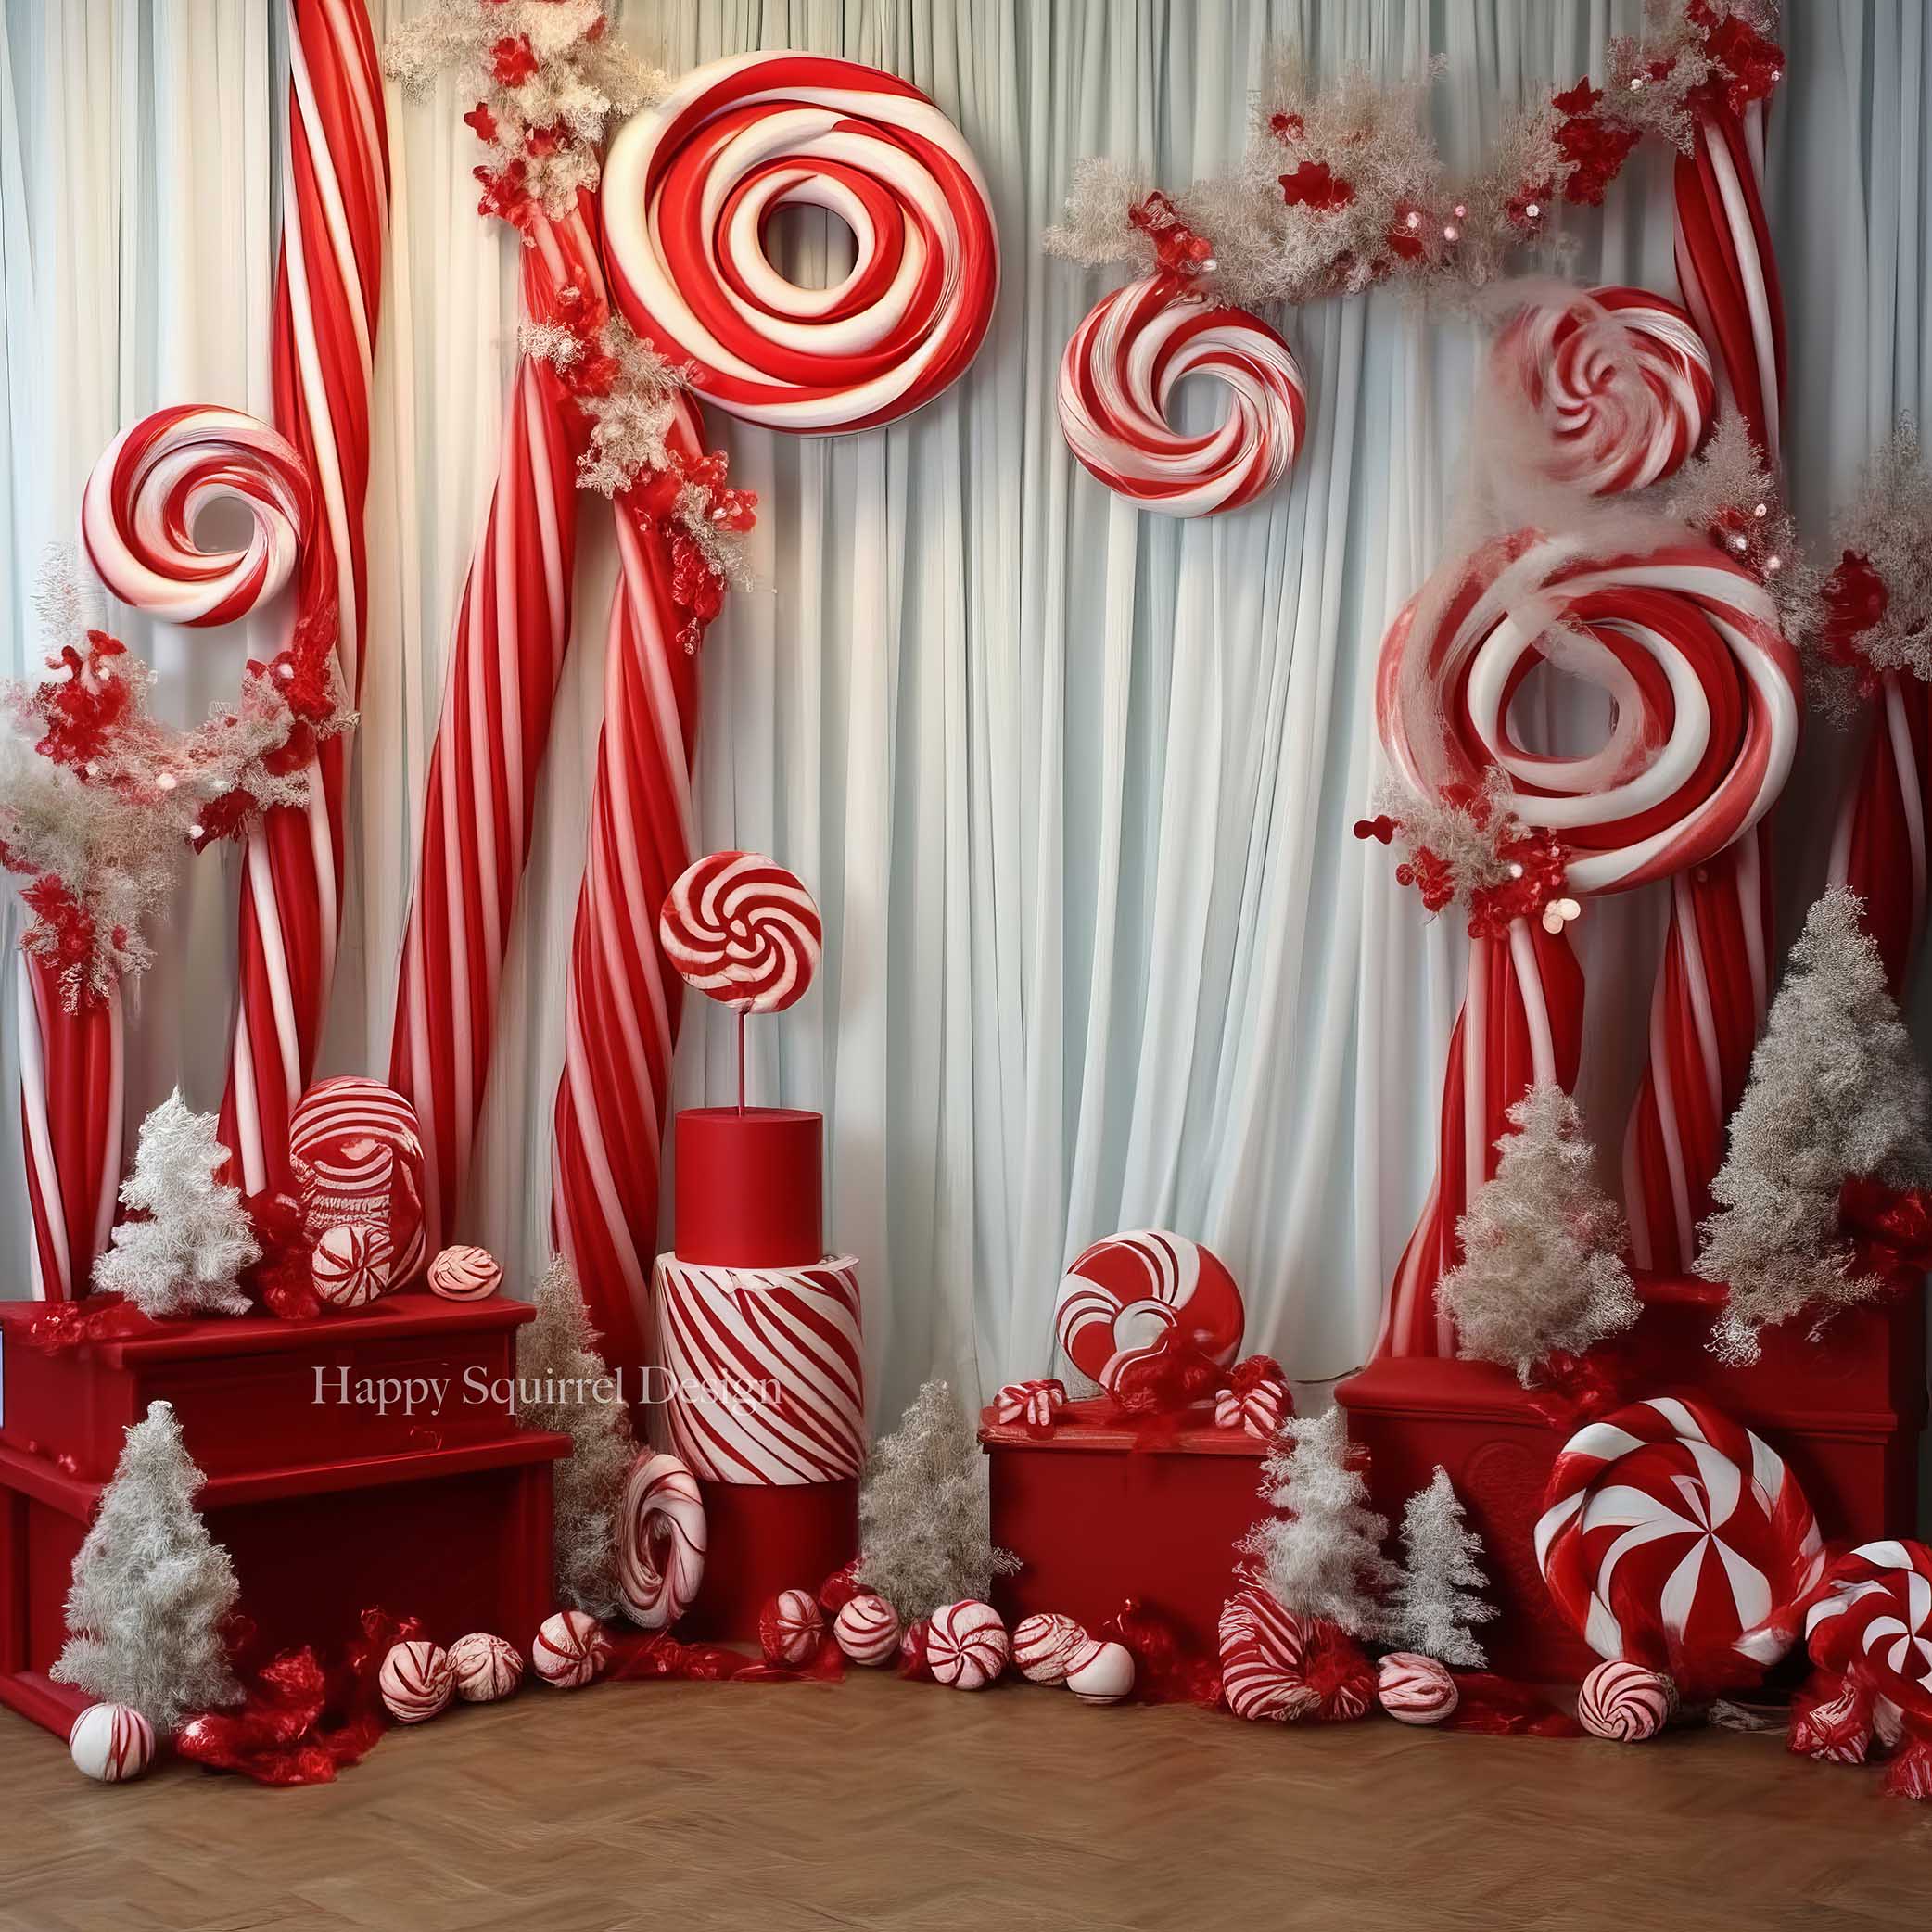 Make It Merry Candy Cane Background